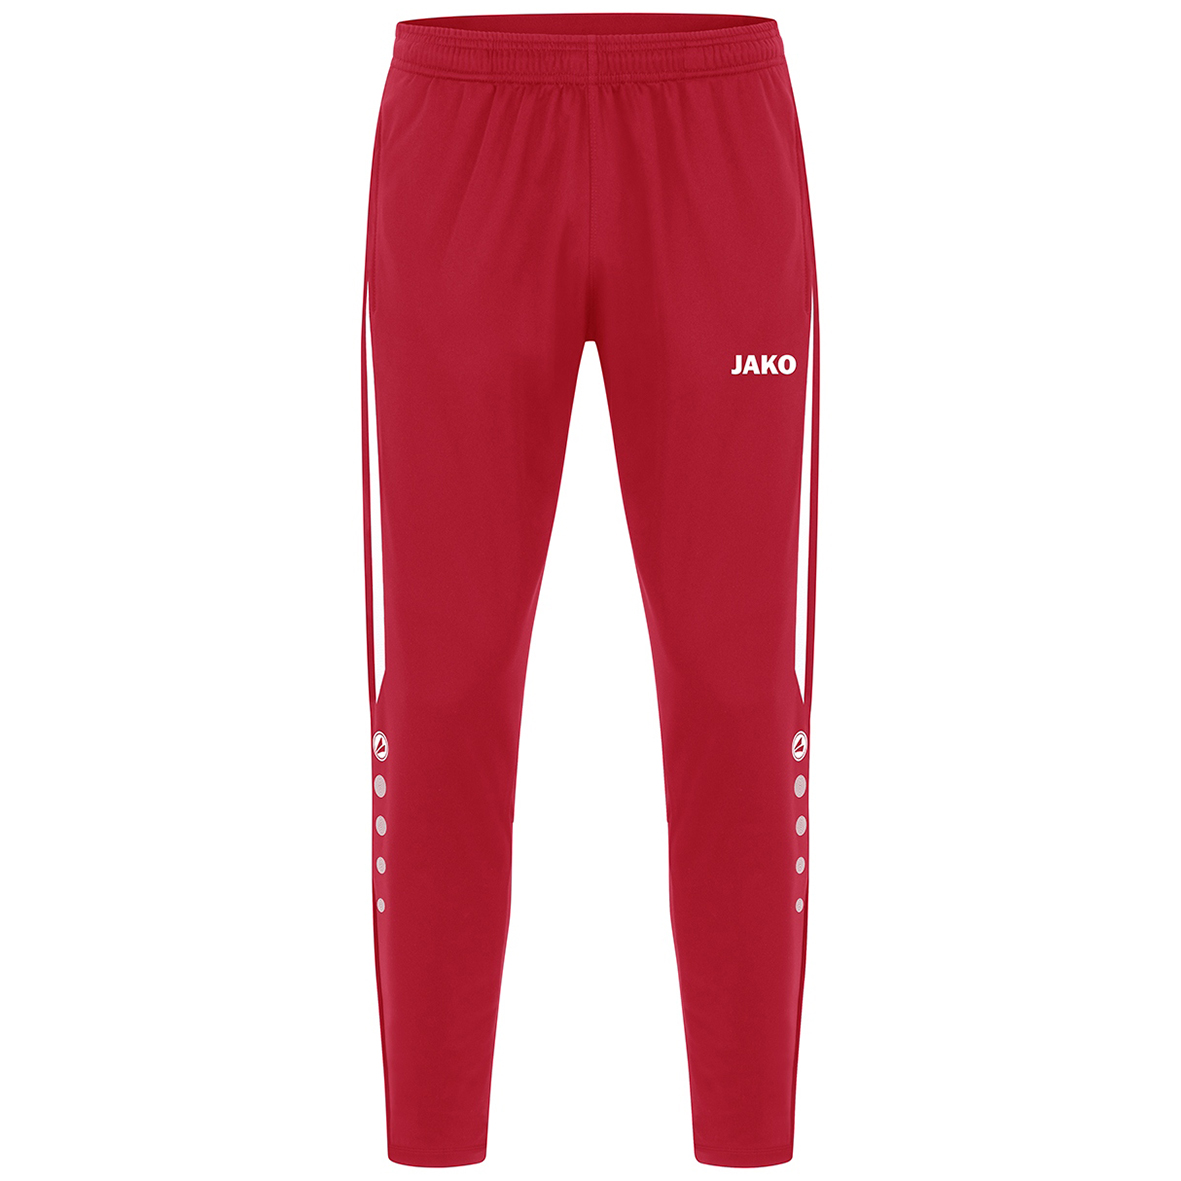 JAKO POWER POLYESTER TROUSERS, RED-WHITE WOMEN.